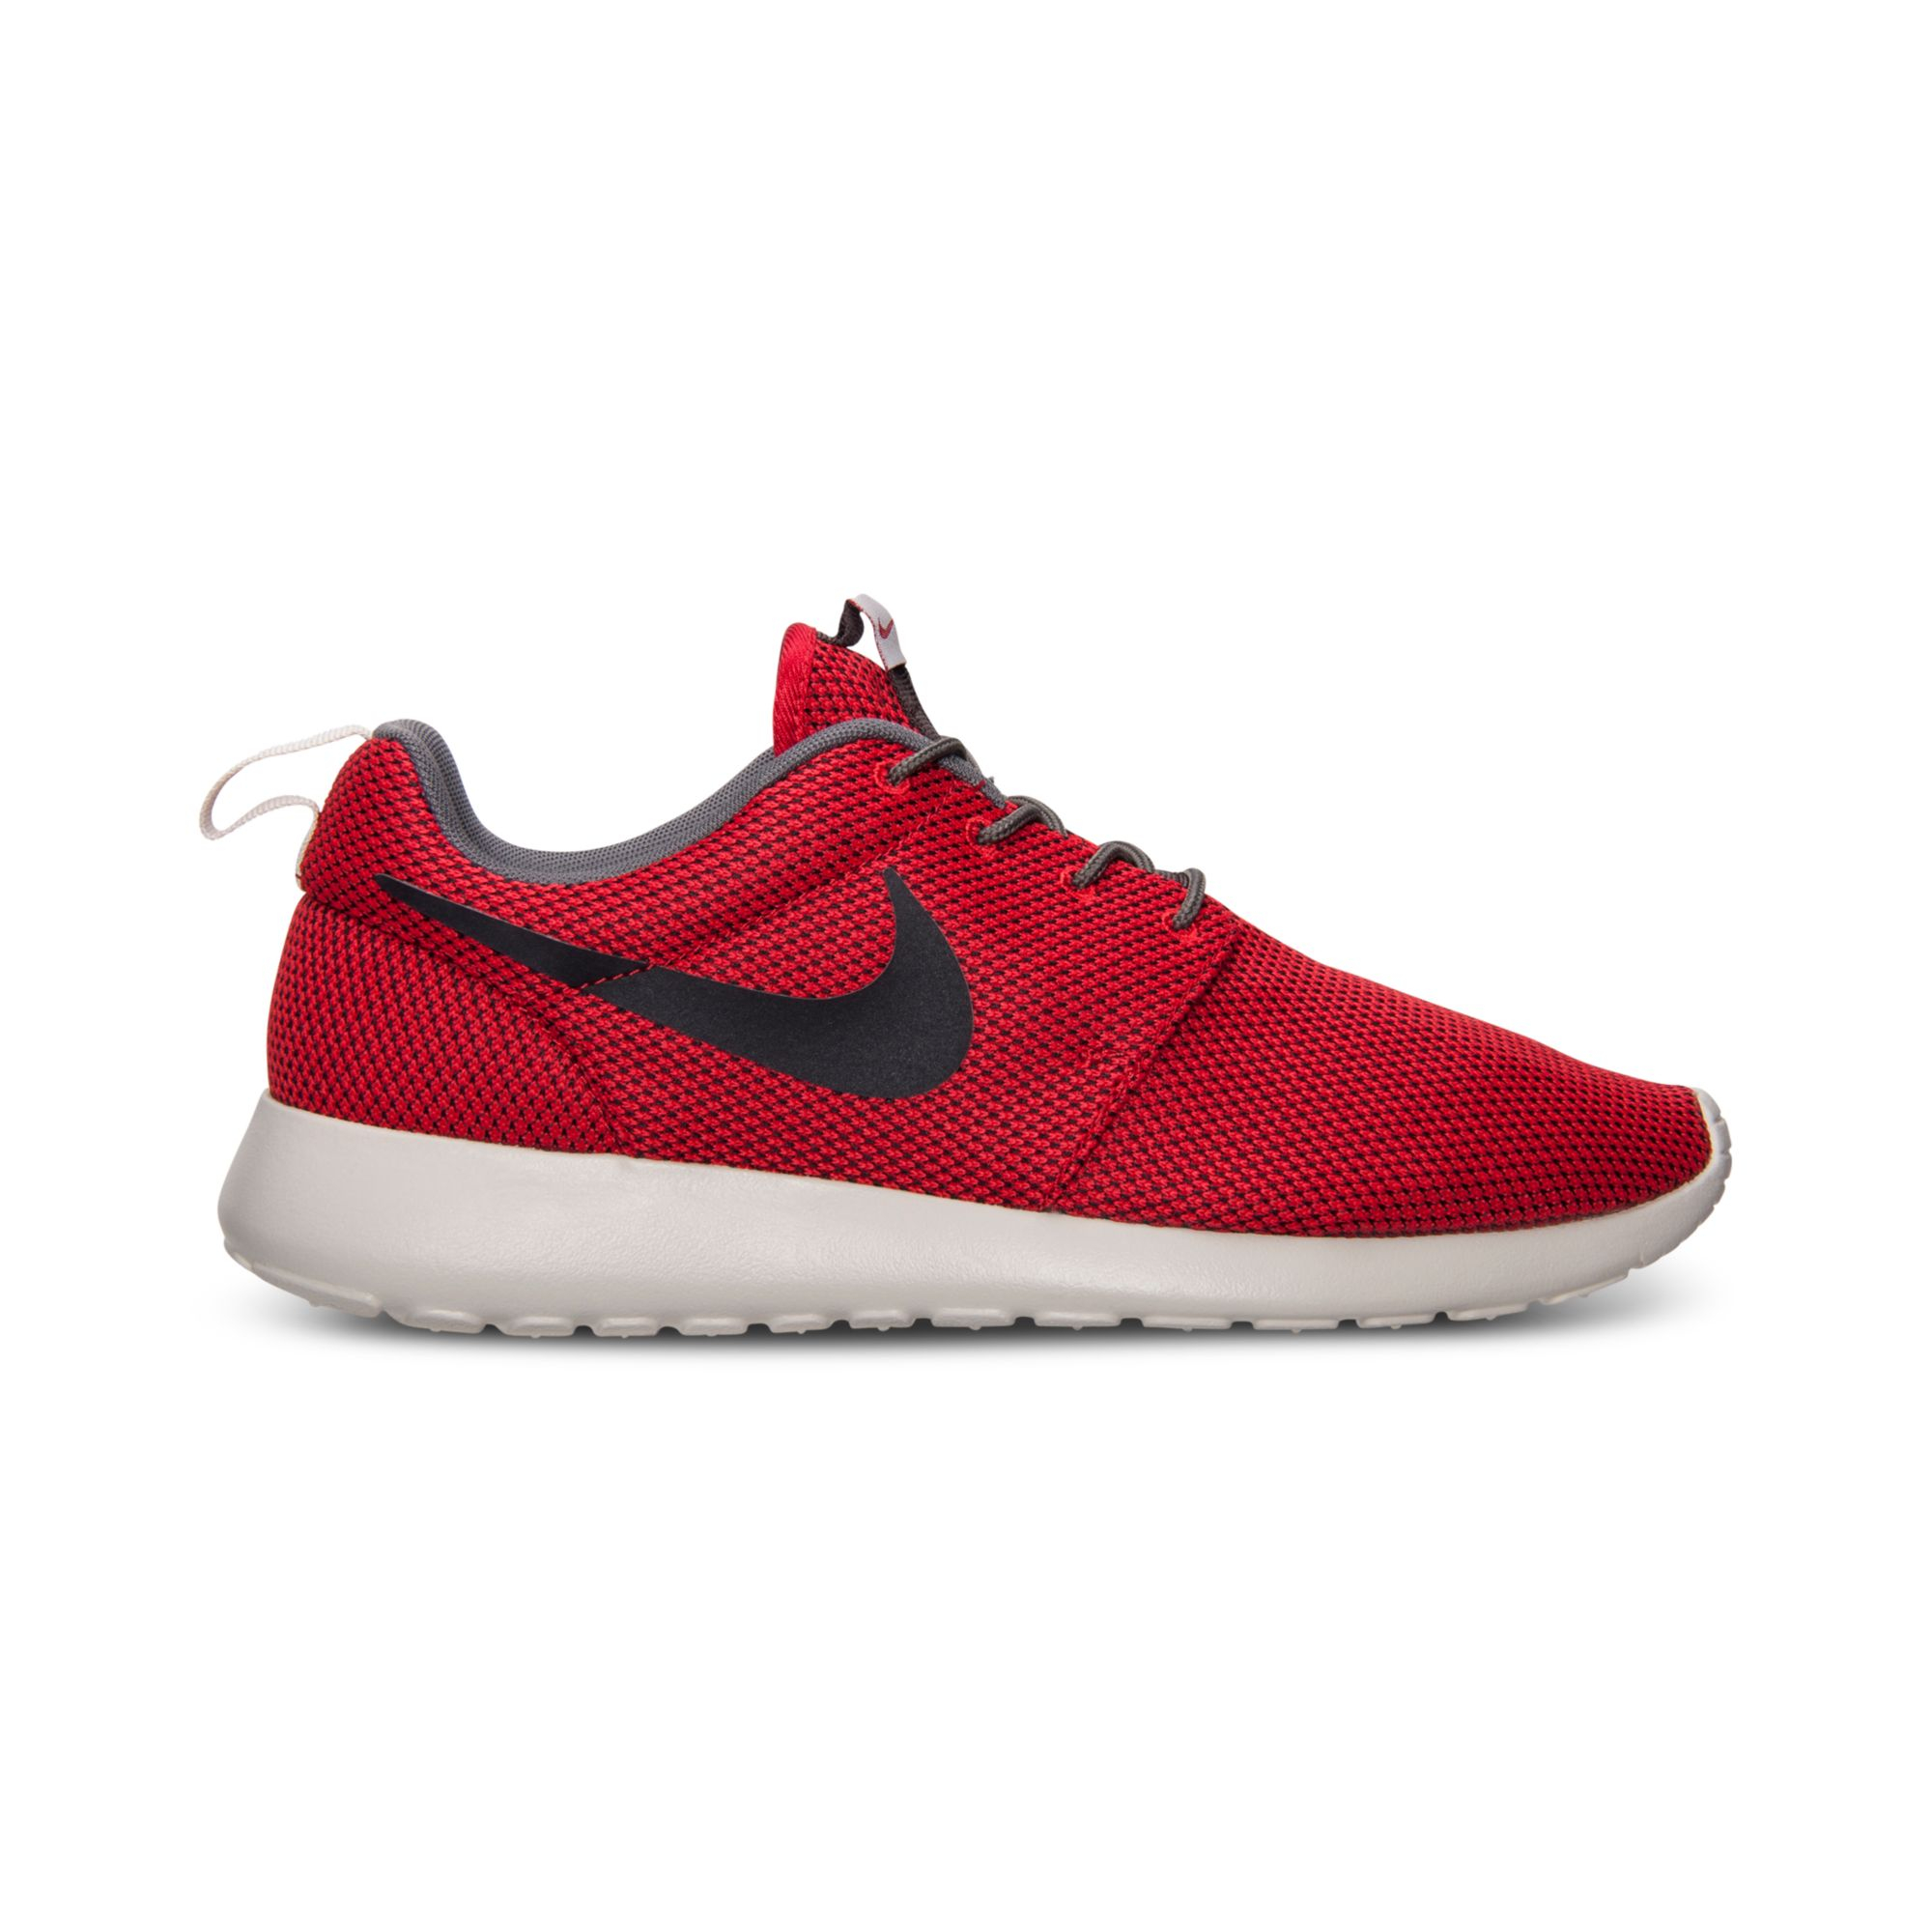 Lyst - Nike Mens Roshe Run Casual Sneakers From Finish Line in Red for Men